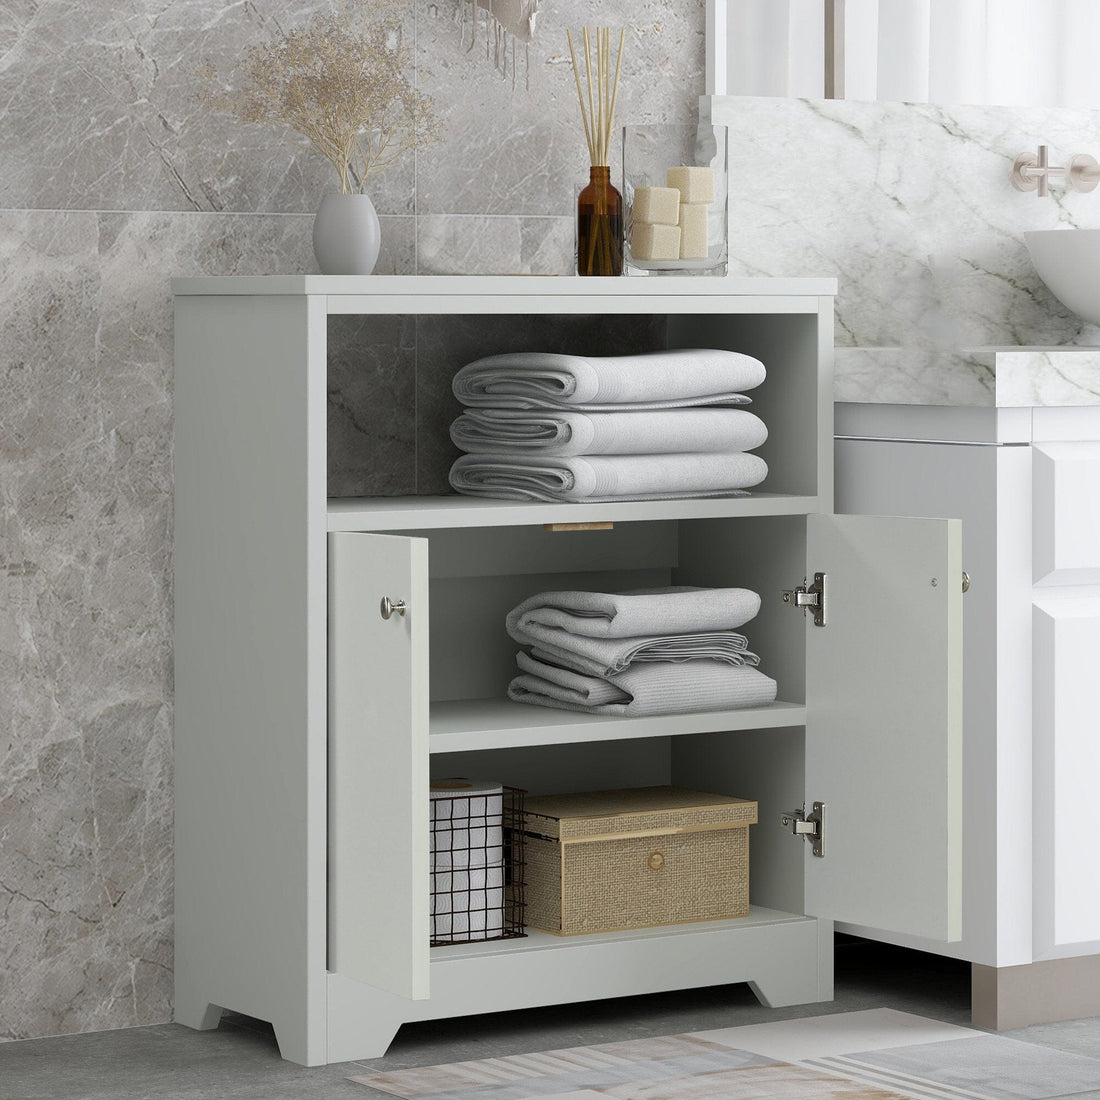 Giving Tree Grey Bathroom Storage Cabinet with Adjustable Shelves, Freestanding Floor Cabinet for Home Kitchen, Easy to Assemble